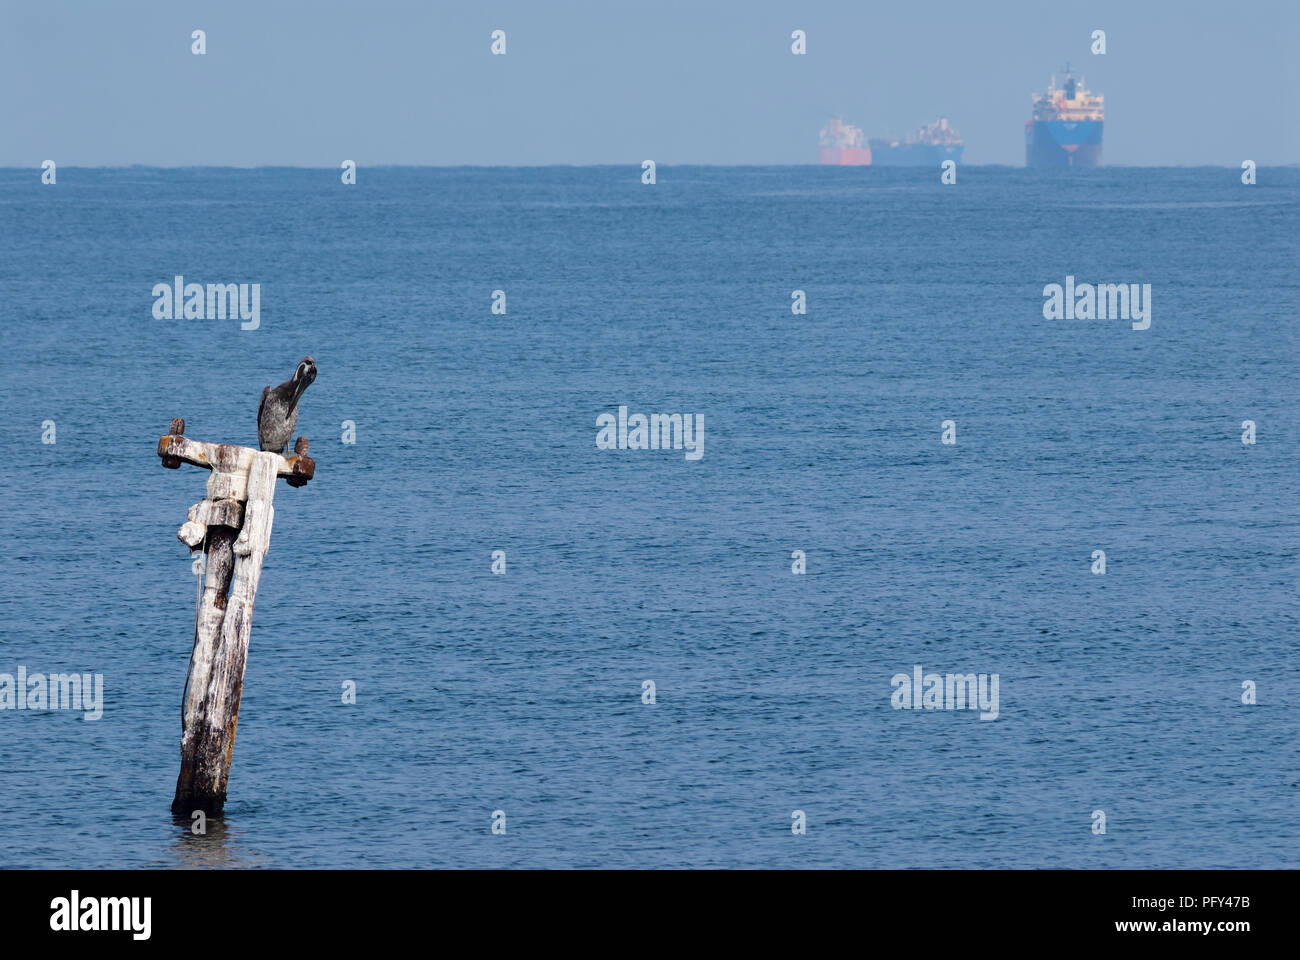 A brown pelican (Pelecanidae) and three oil tankers at sea Stock Photo